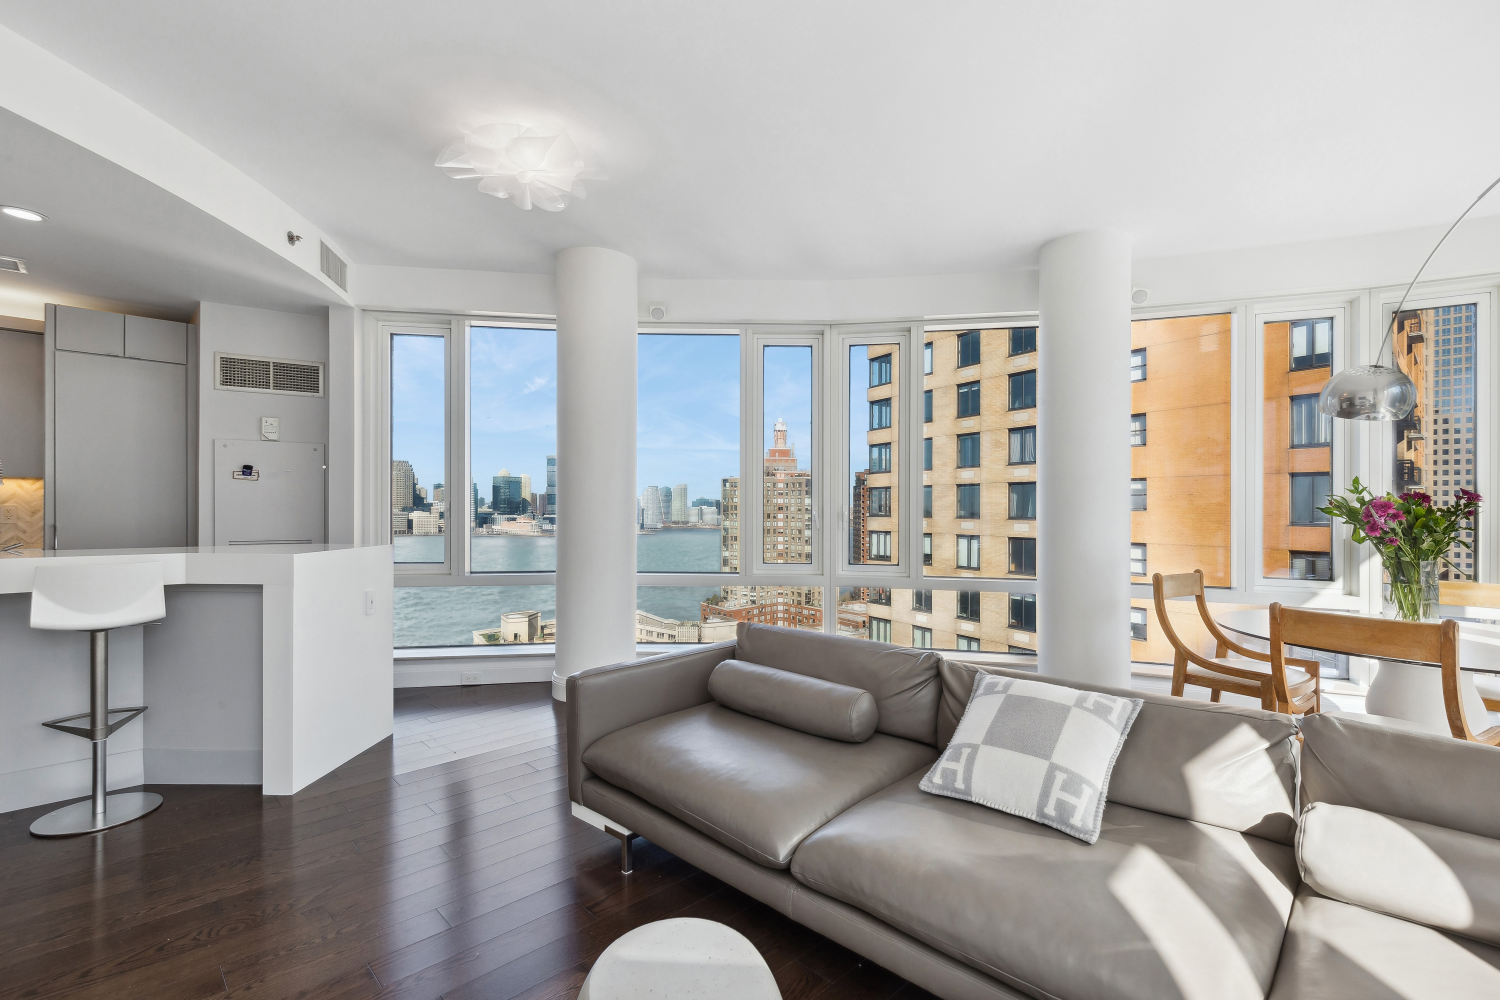 70 Little West Street 20Ab, Battery Park City, Downtown, NYC - 4 Bedrooms  
3 Bathrooms  
9 Rooms - 